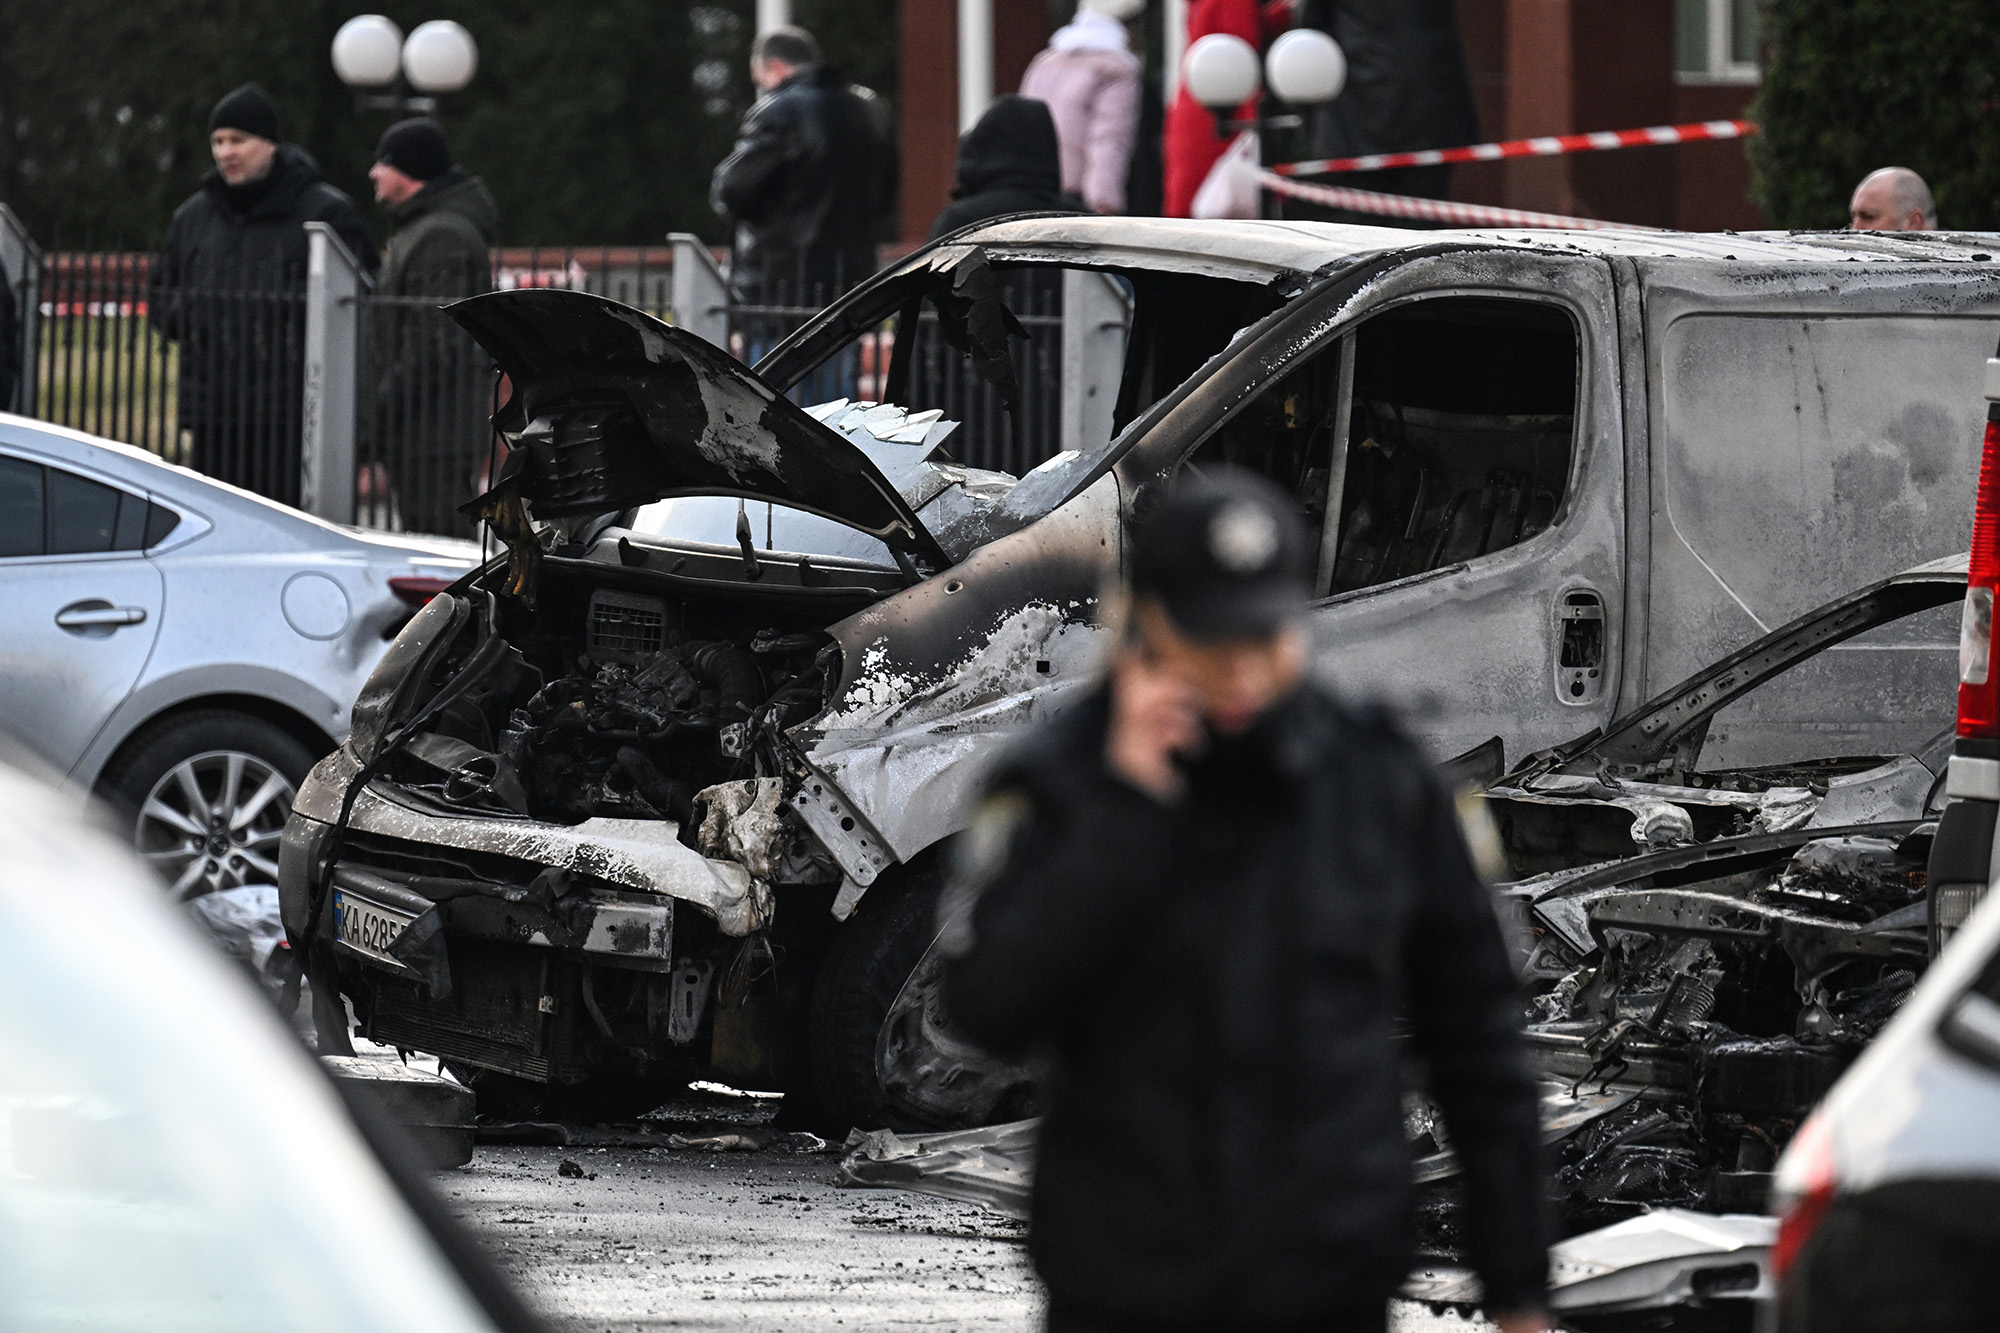 The aftermath of the attack in Kyiv, Ukraine, on March 9.